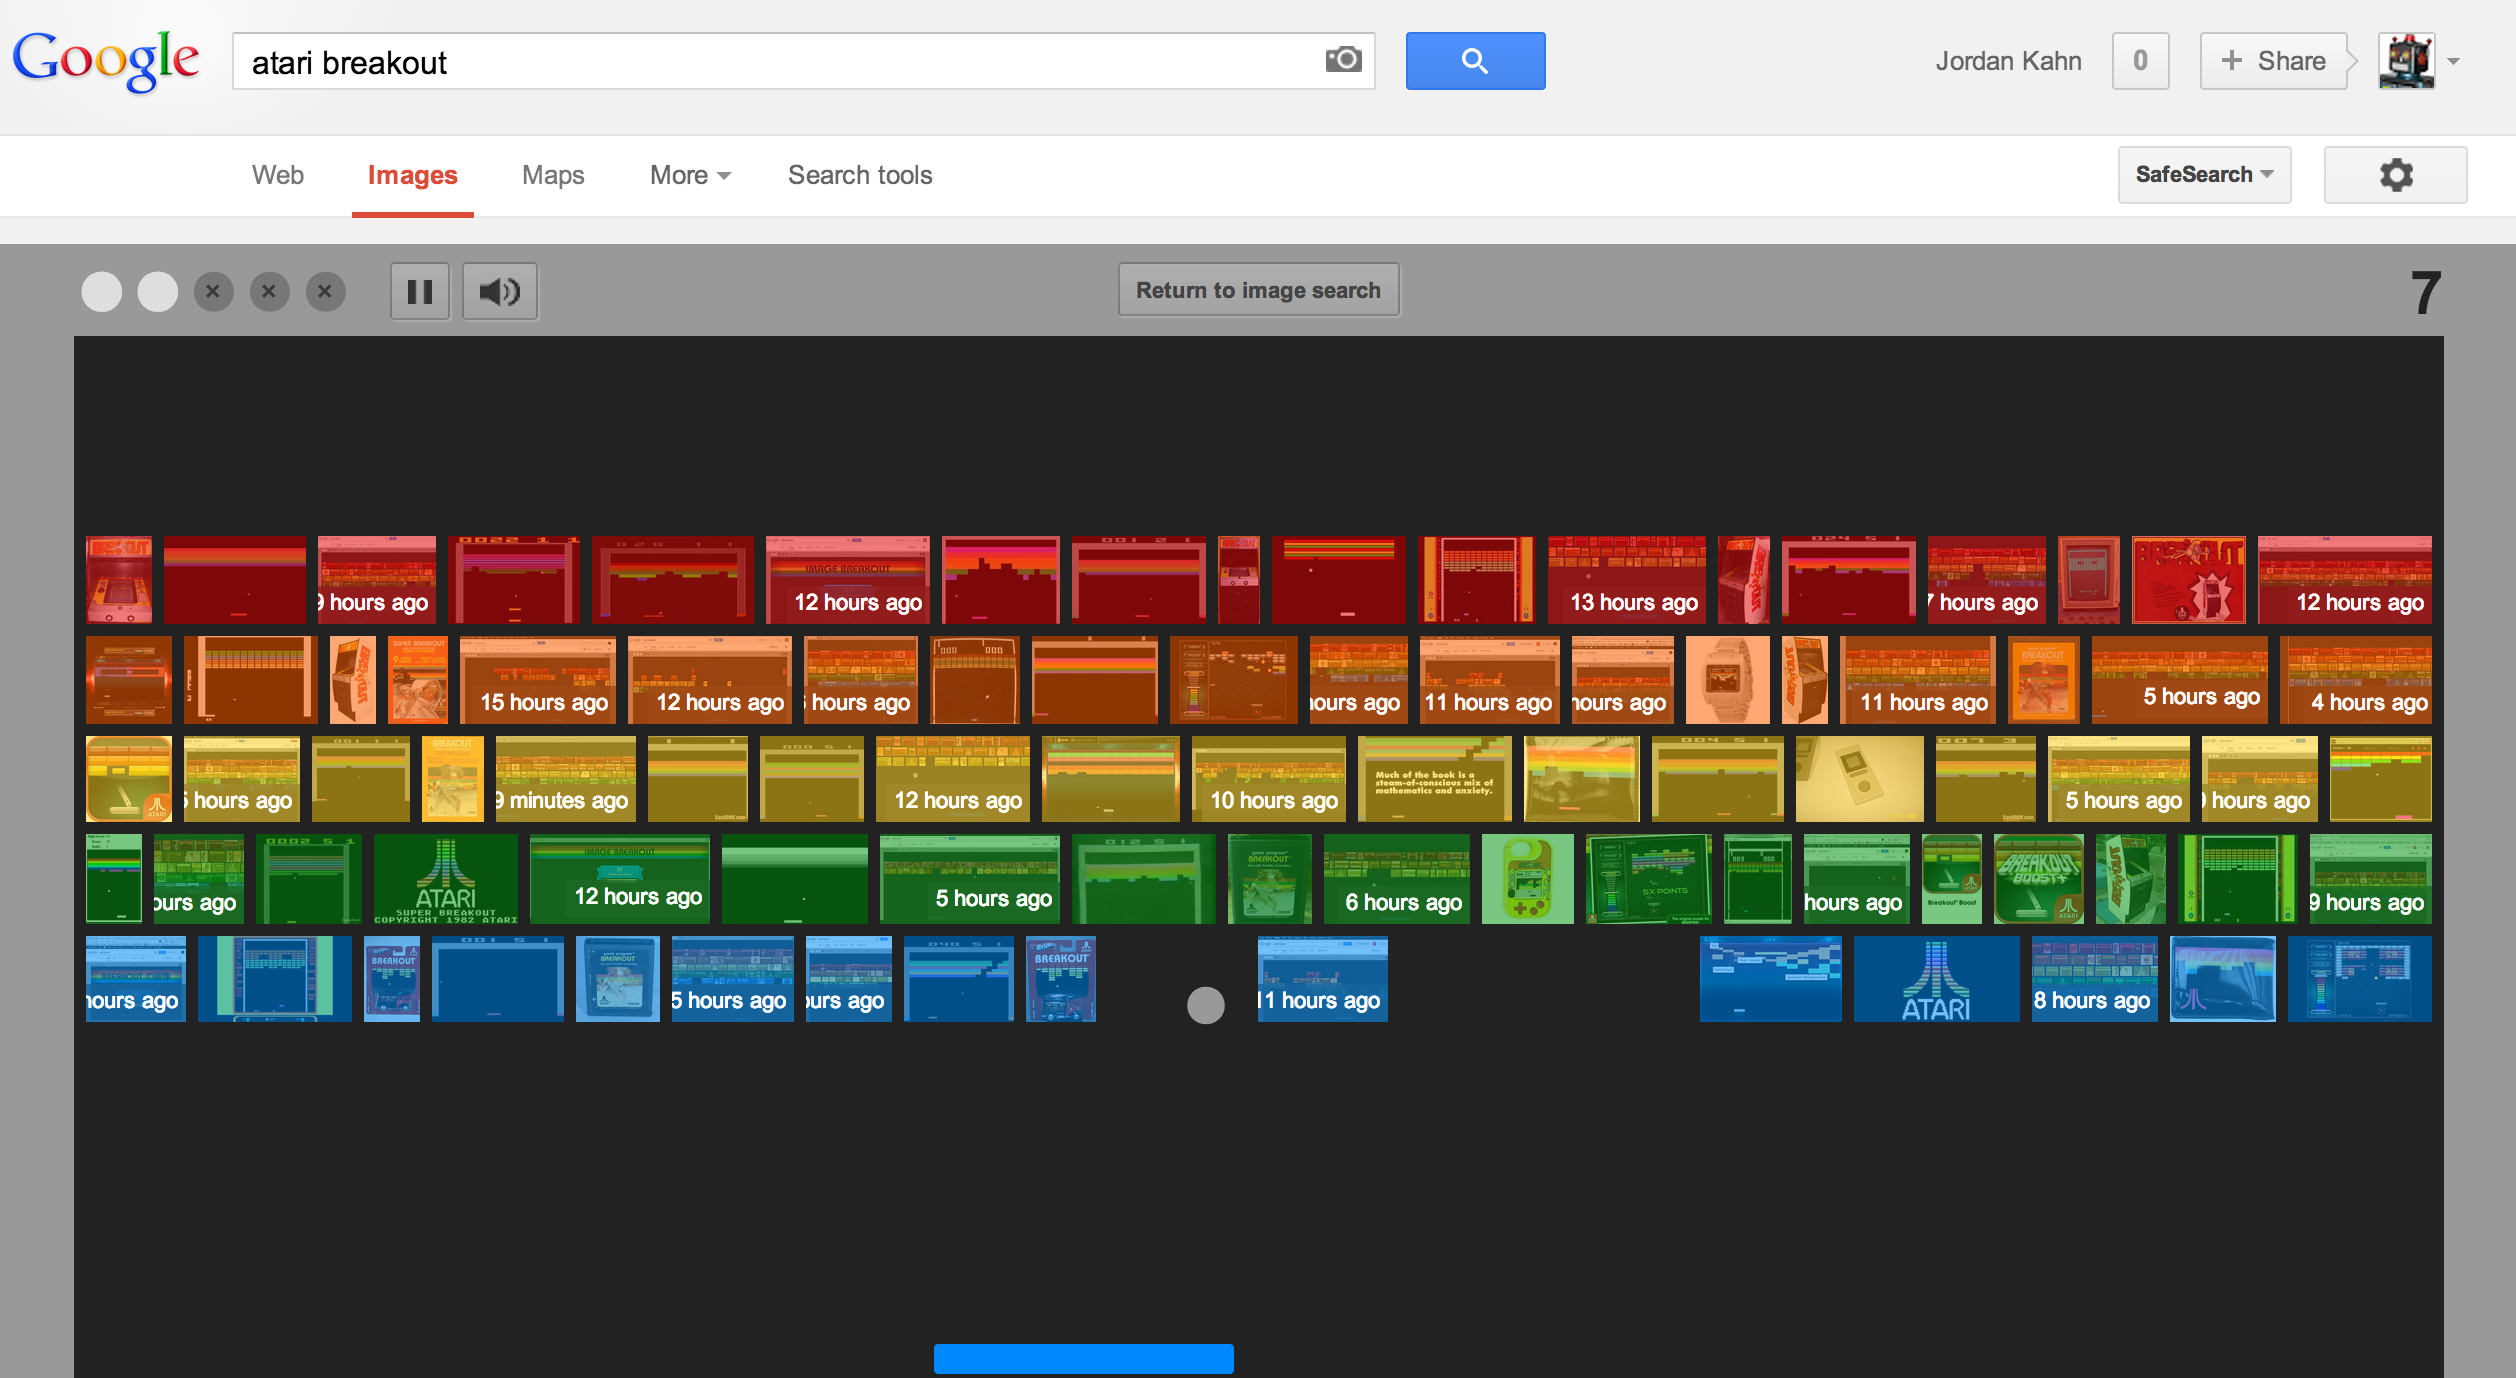 Google commemorates Atari Breakout with a fully playable easter egg in Google Images